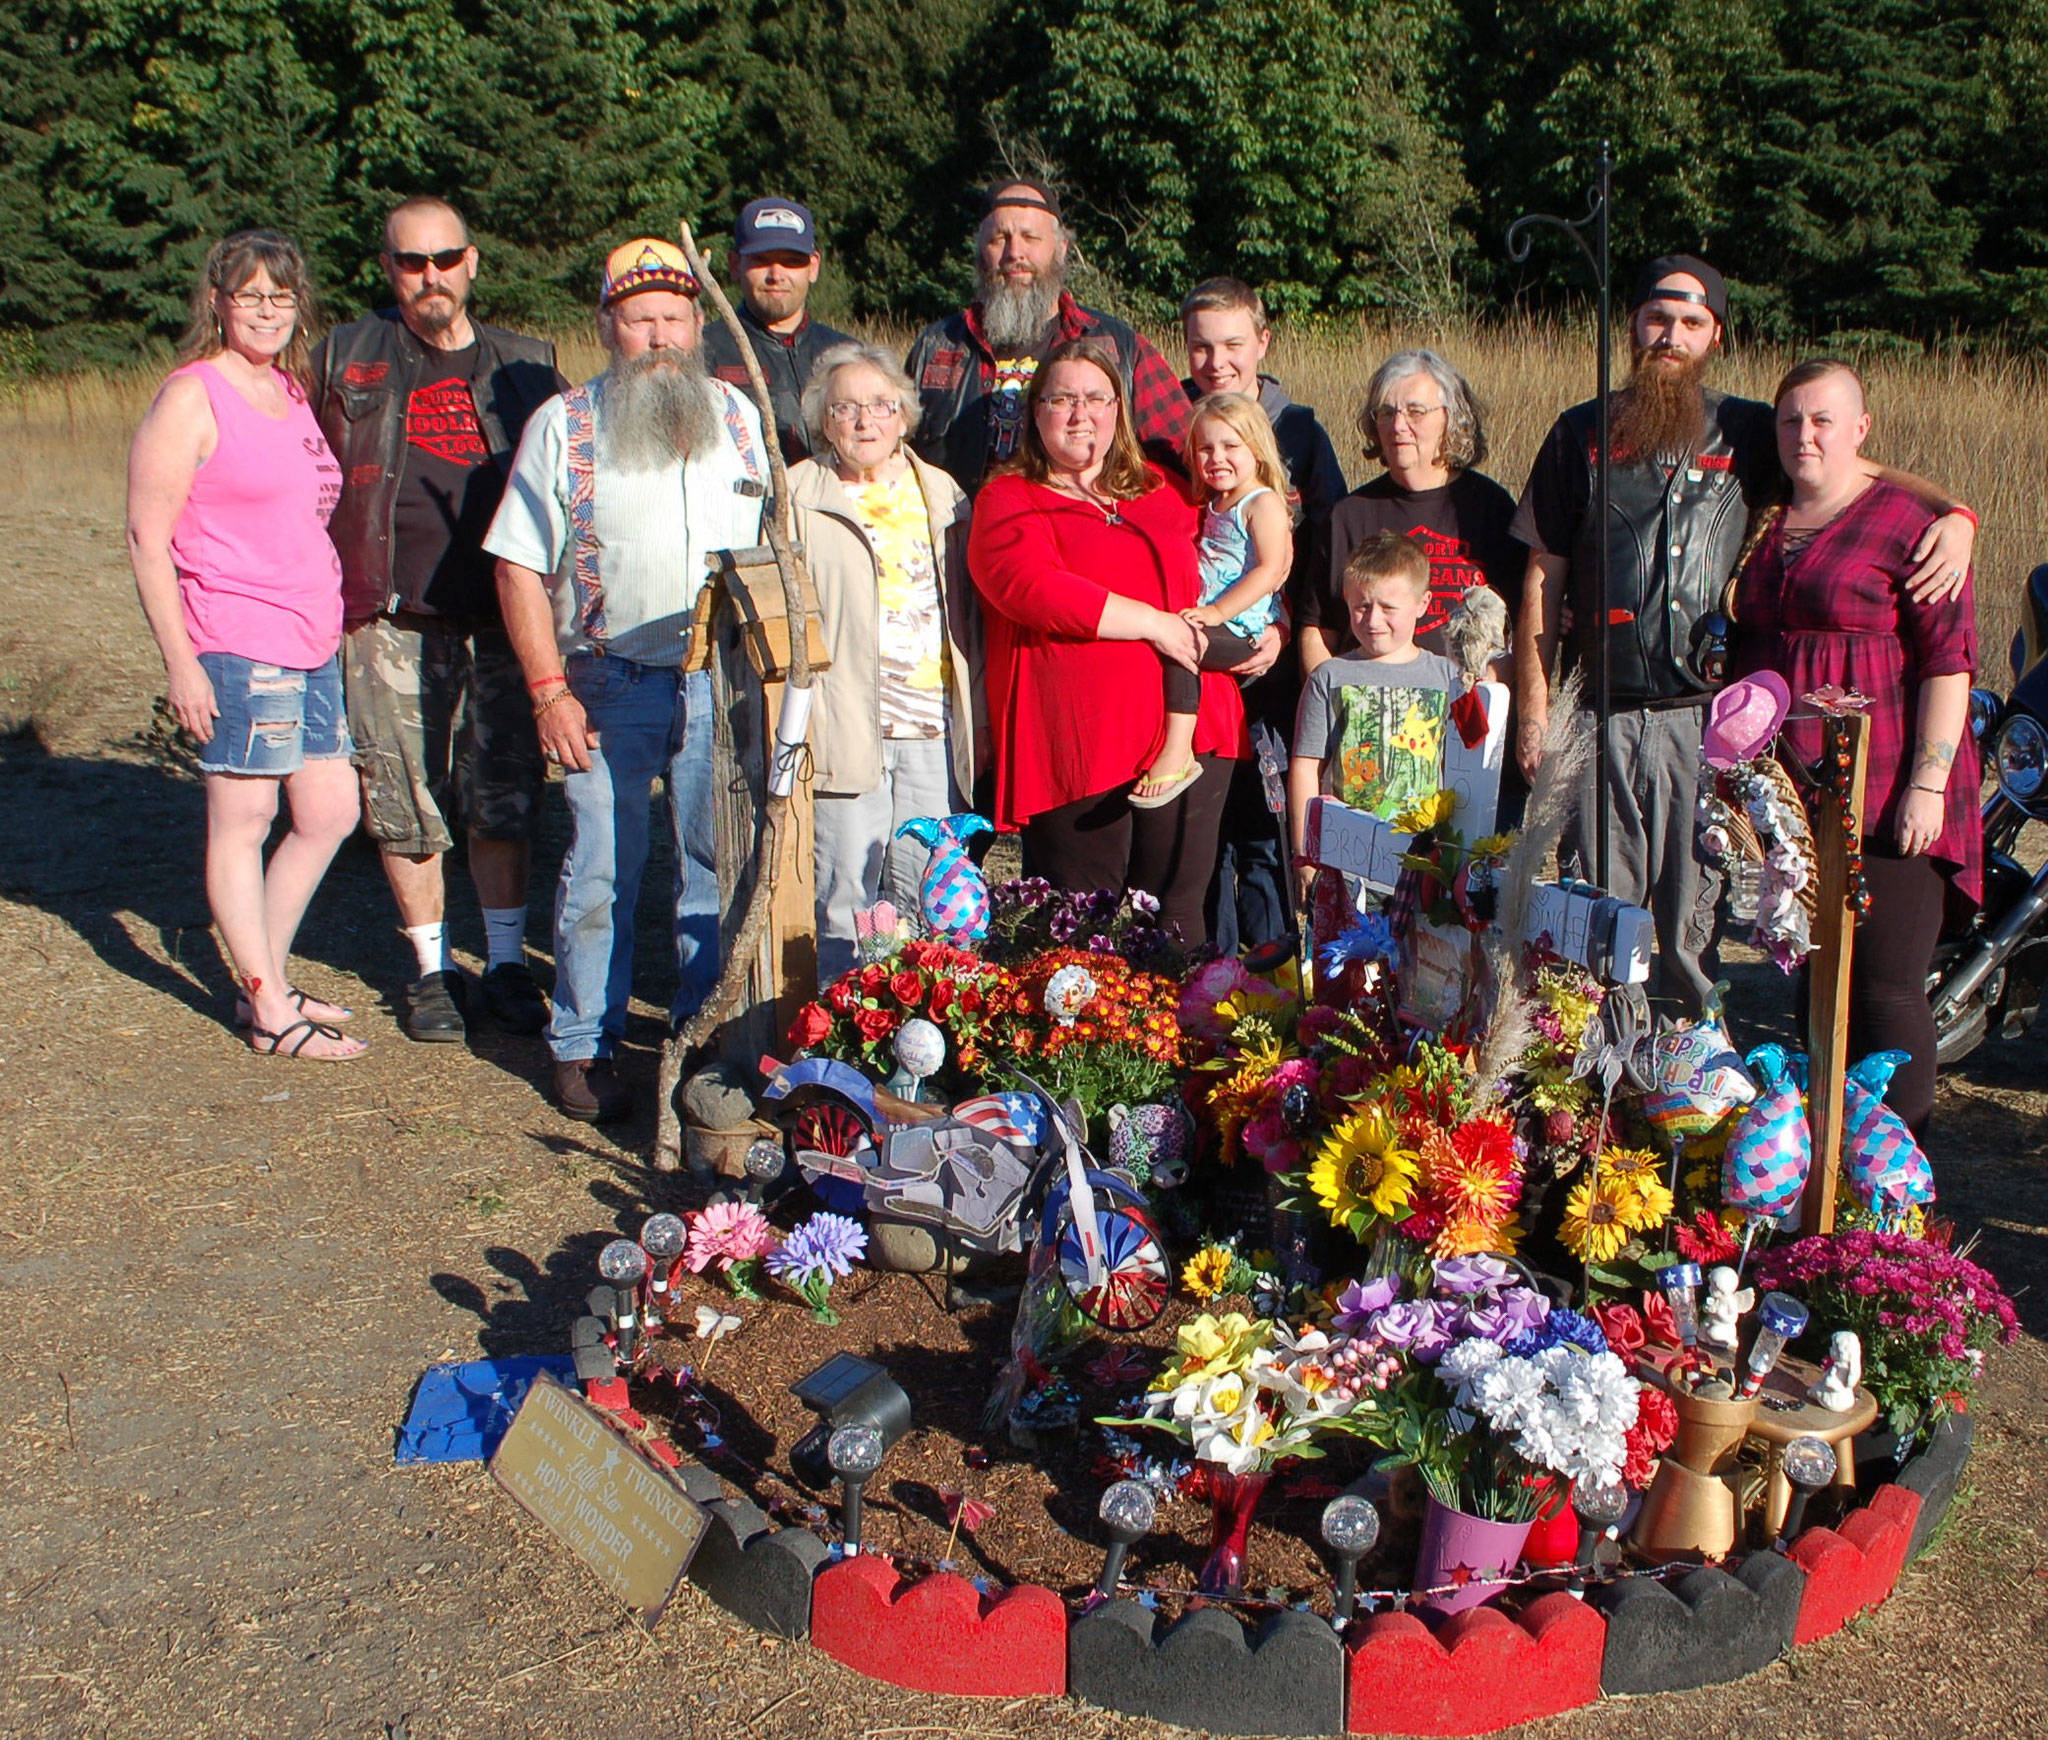 Brooke Bedinger’s family stands at her memorial on the side of US Highway 101 at the Morse Creek curve east of Port Angeles near the site where she died in a motorcycle wreck on June 21. From left, Pat Poage, Brooke’s uncle Woody Johnson, grandfather Gary Johnson, grandmother Debbie Johnson, uncle Josh Robbins, father Don Bedinger, mother Kim Bedinger with niece Ella Bedinger, brother Chase Bedinger, nephew Corbin Alves, grandmother Kathy Bedinger, brother Donald Bedinger and sister-in-law Katy Bedinger, stand together. Sequim Gazette photo by Erin Hawkins